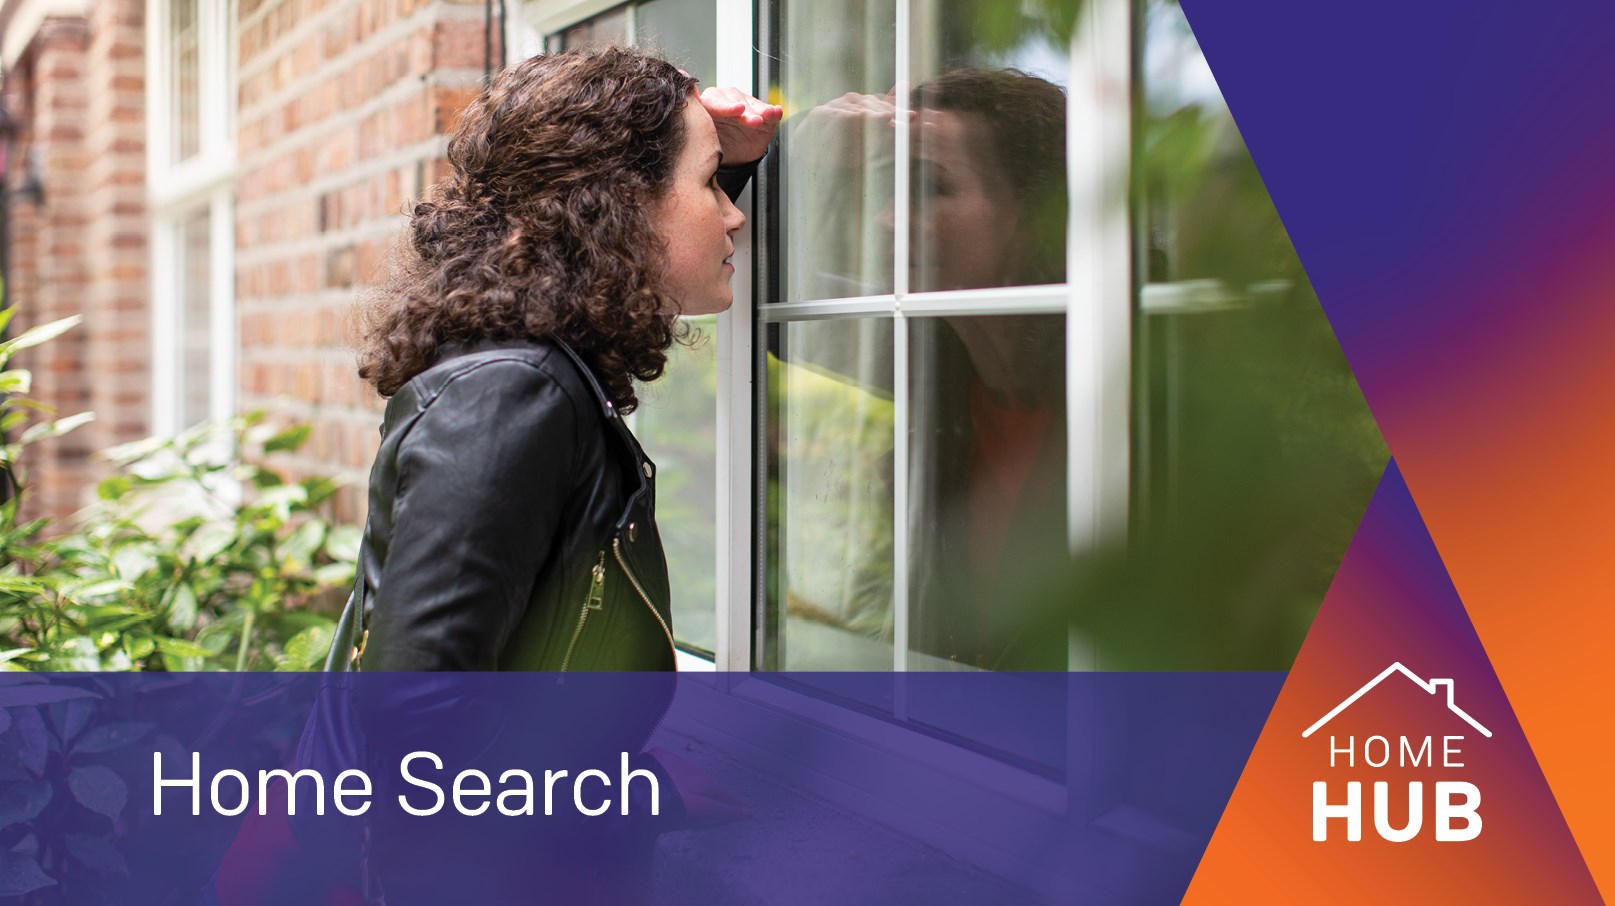 Woman looking into a house via closed window , text on image 'Home Search'